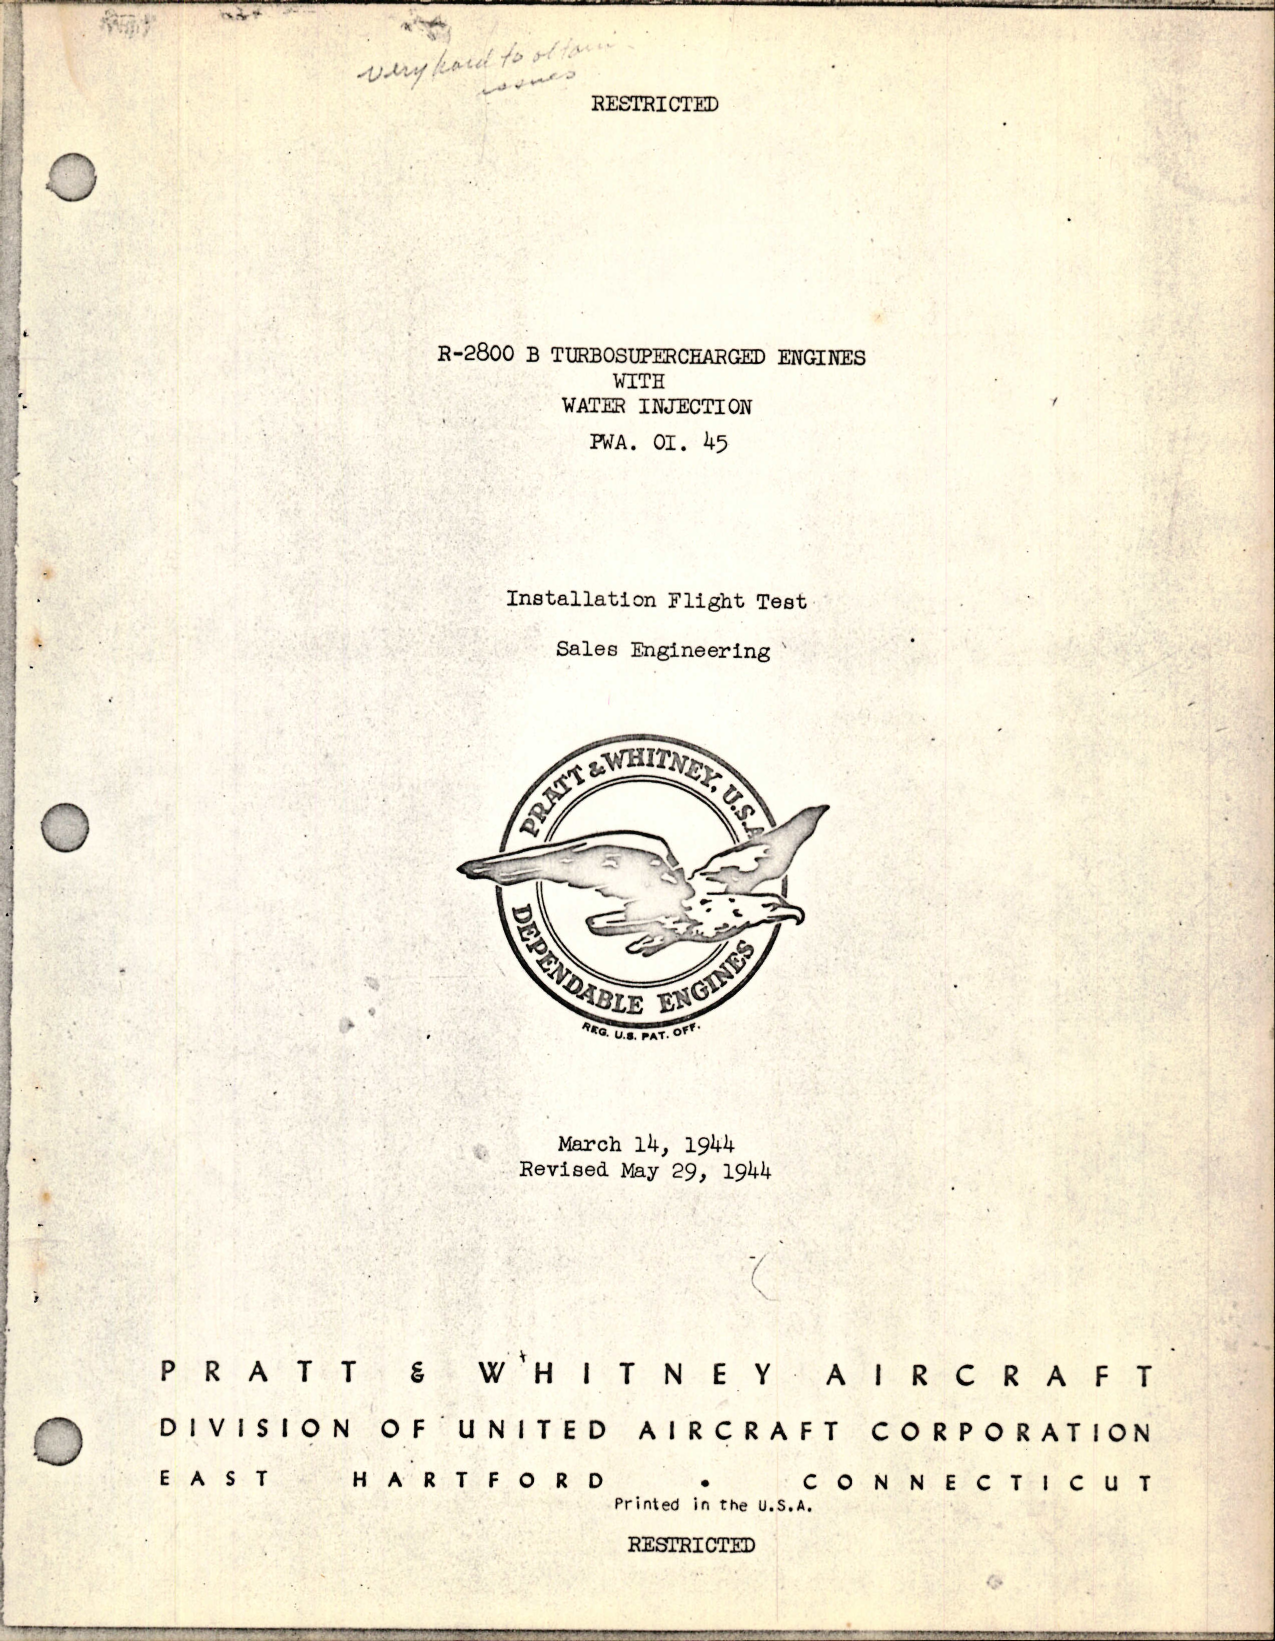 Sample page 1 from AirCorps Library document: Installation Flight Test for R-2800B Turbosupercharged Engines with Water Injection